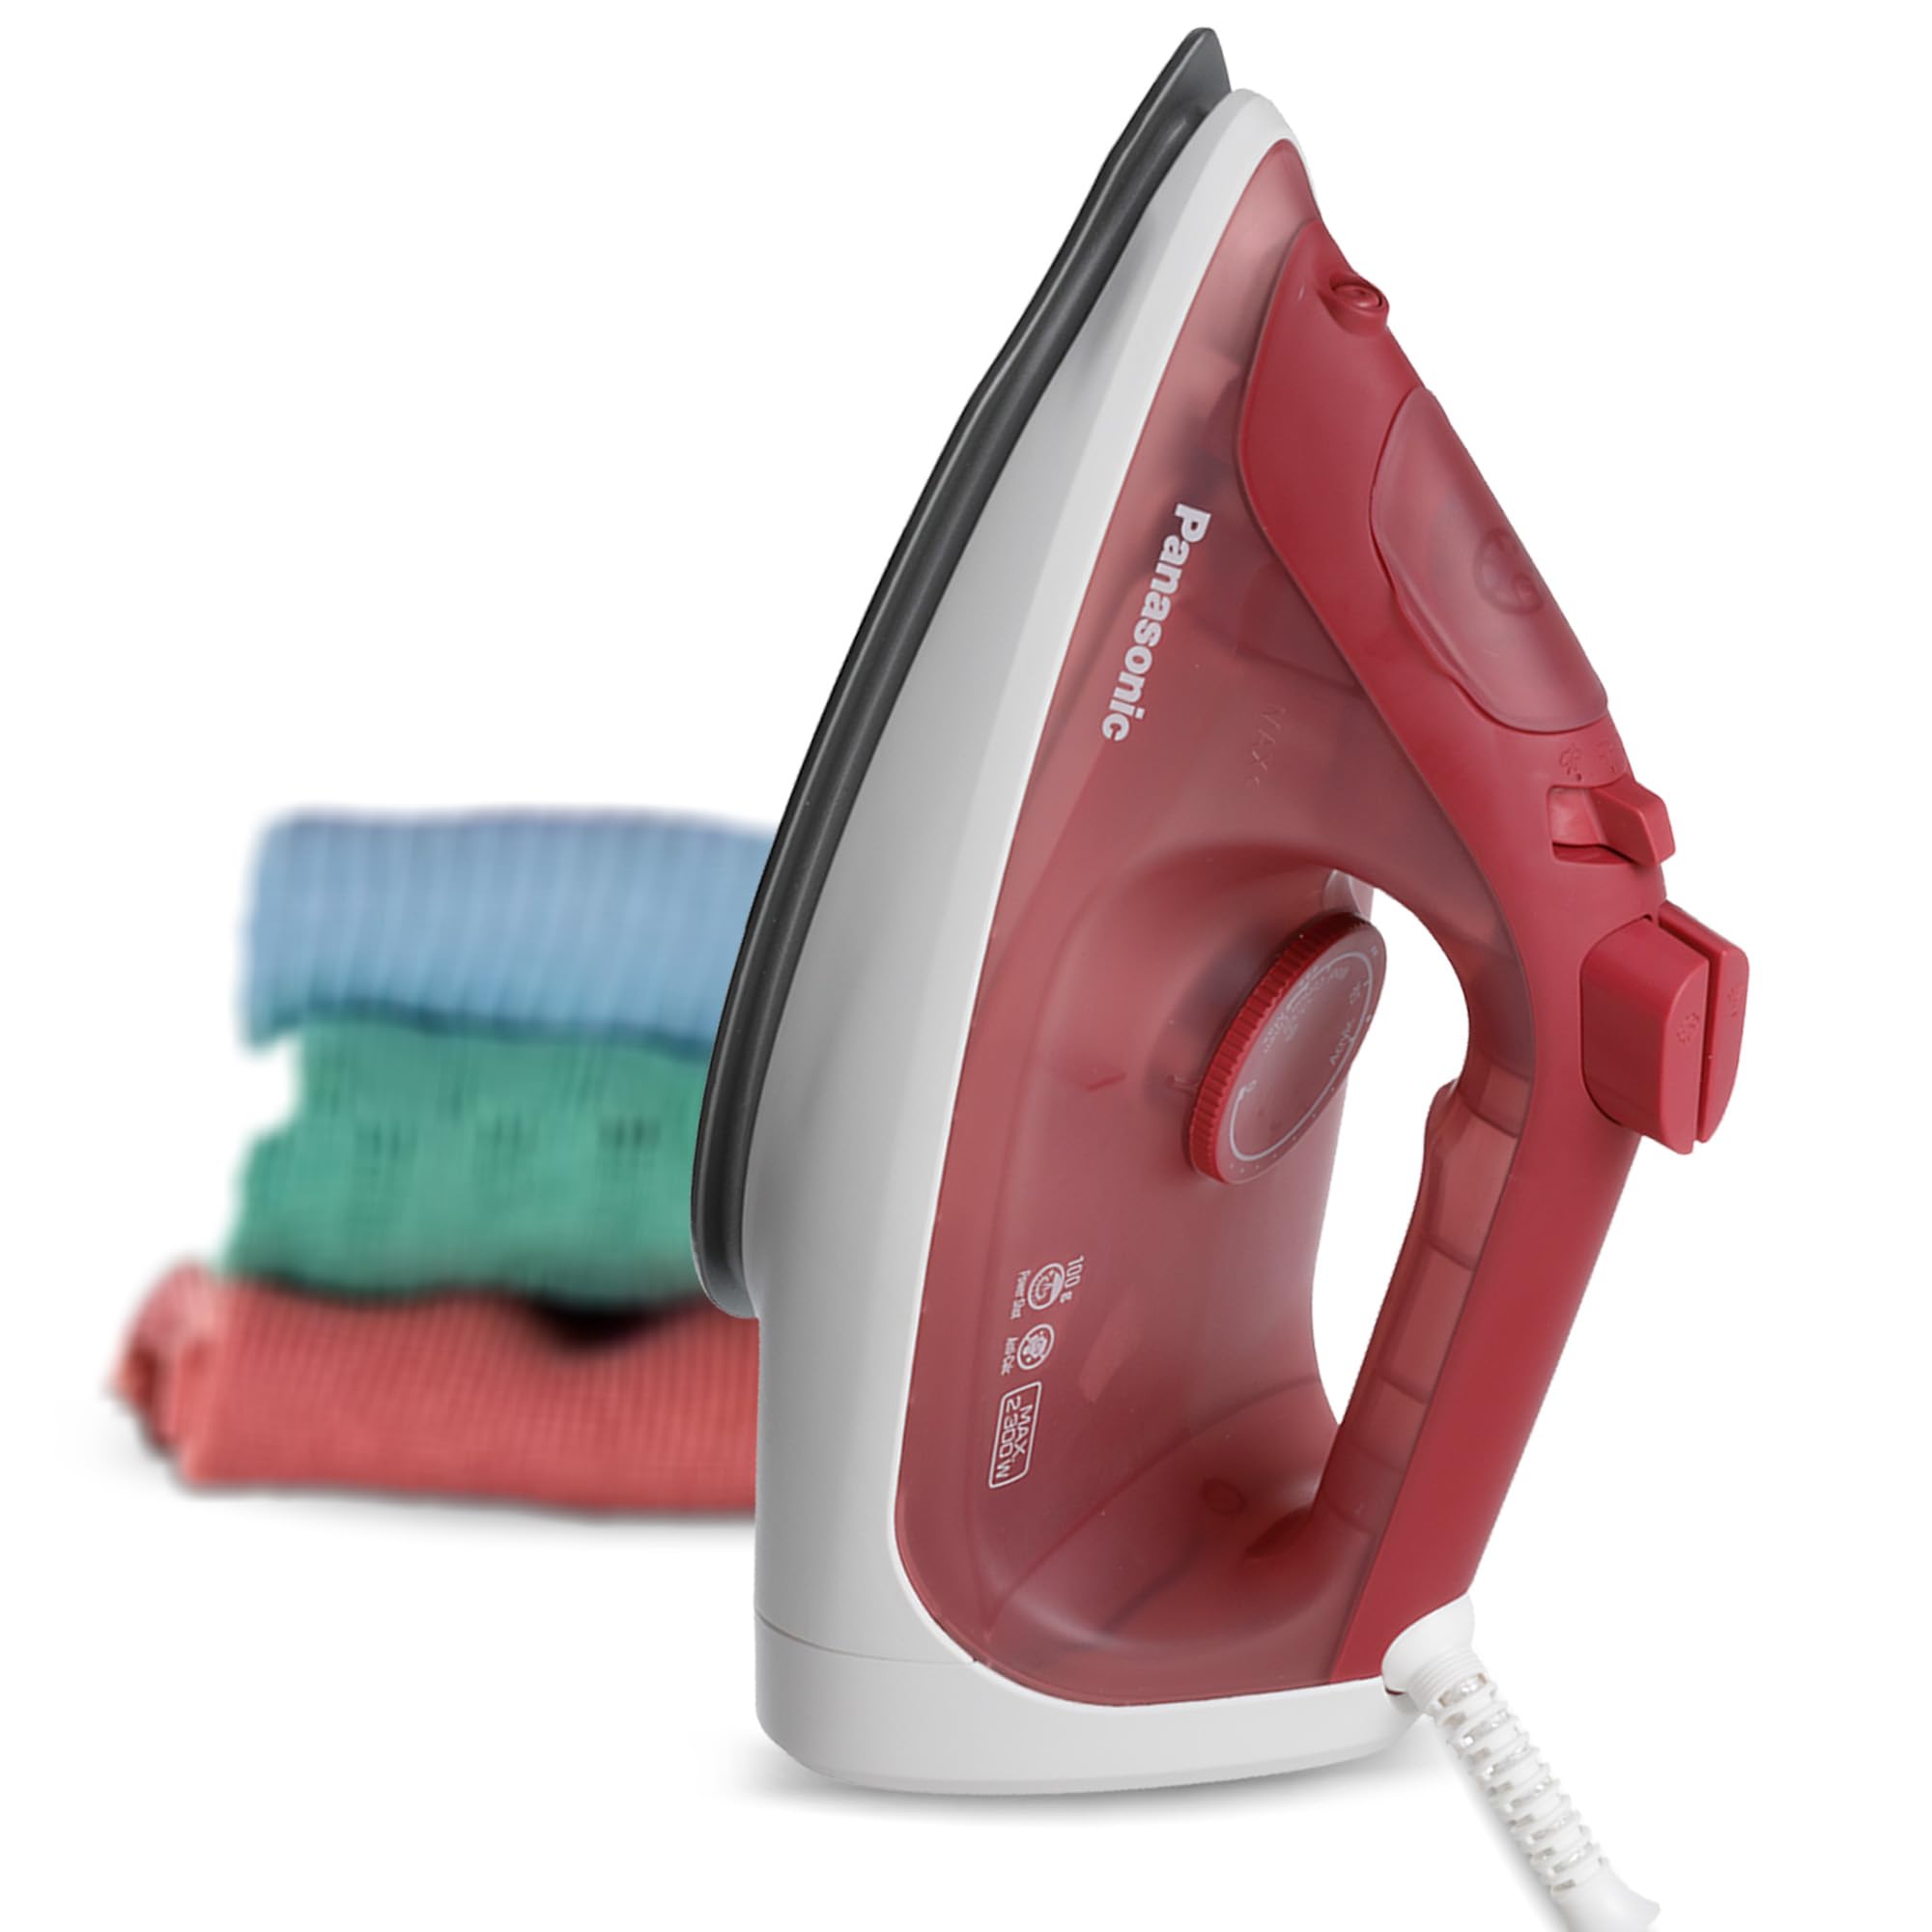 Panasonic Steam Iron NI-S430RTH 2300W with Large Water Tank Capacity, 300ml, Silver Titanium Soleplate - Red